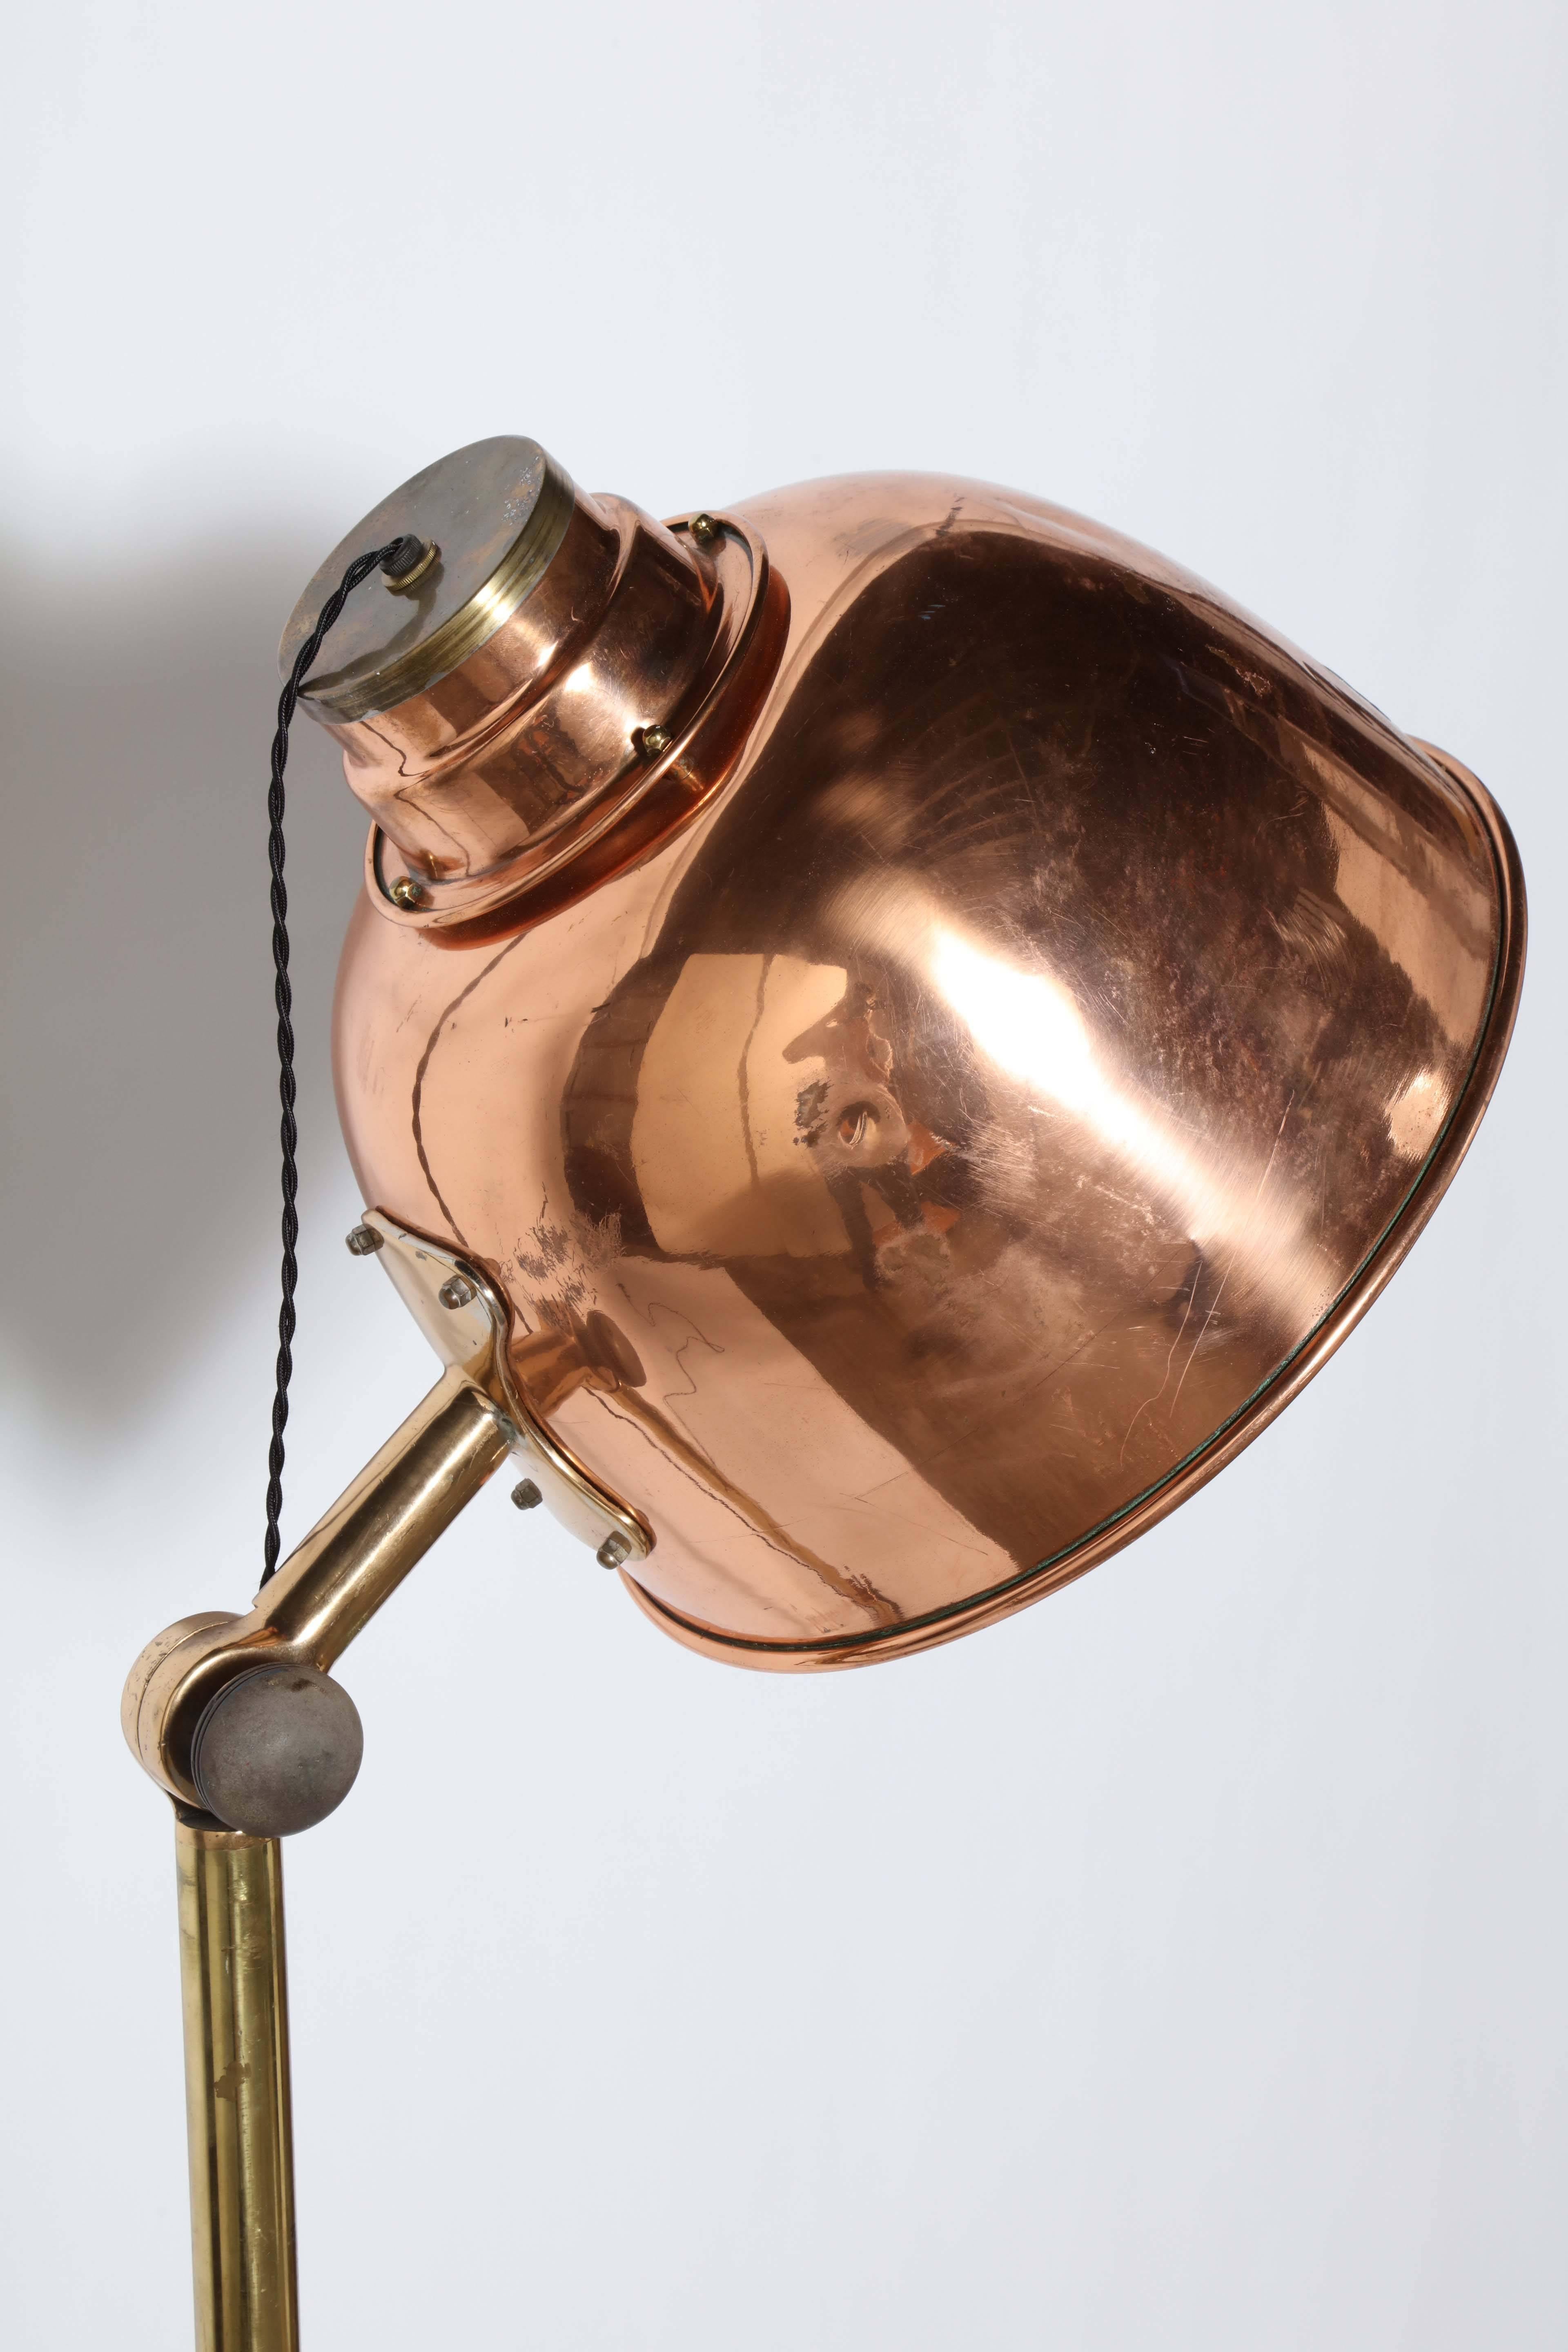 Industrial Substantial Infralite Steel & Brass Floor Lamp with Large Copper Shade, C. 1910